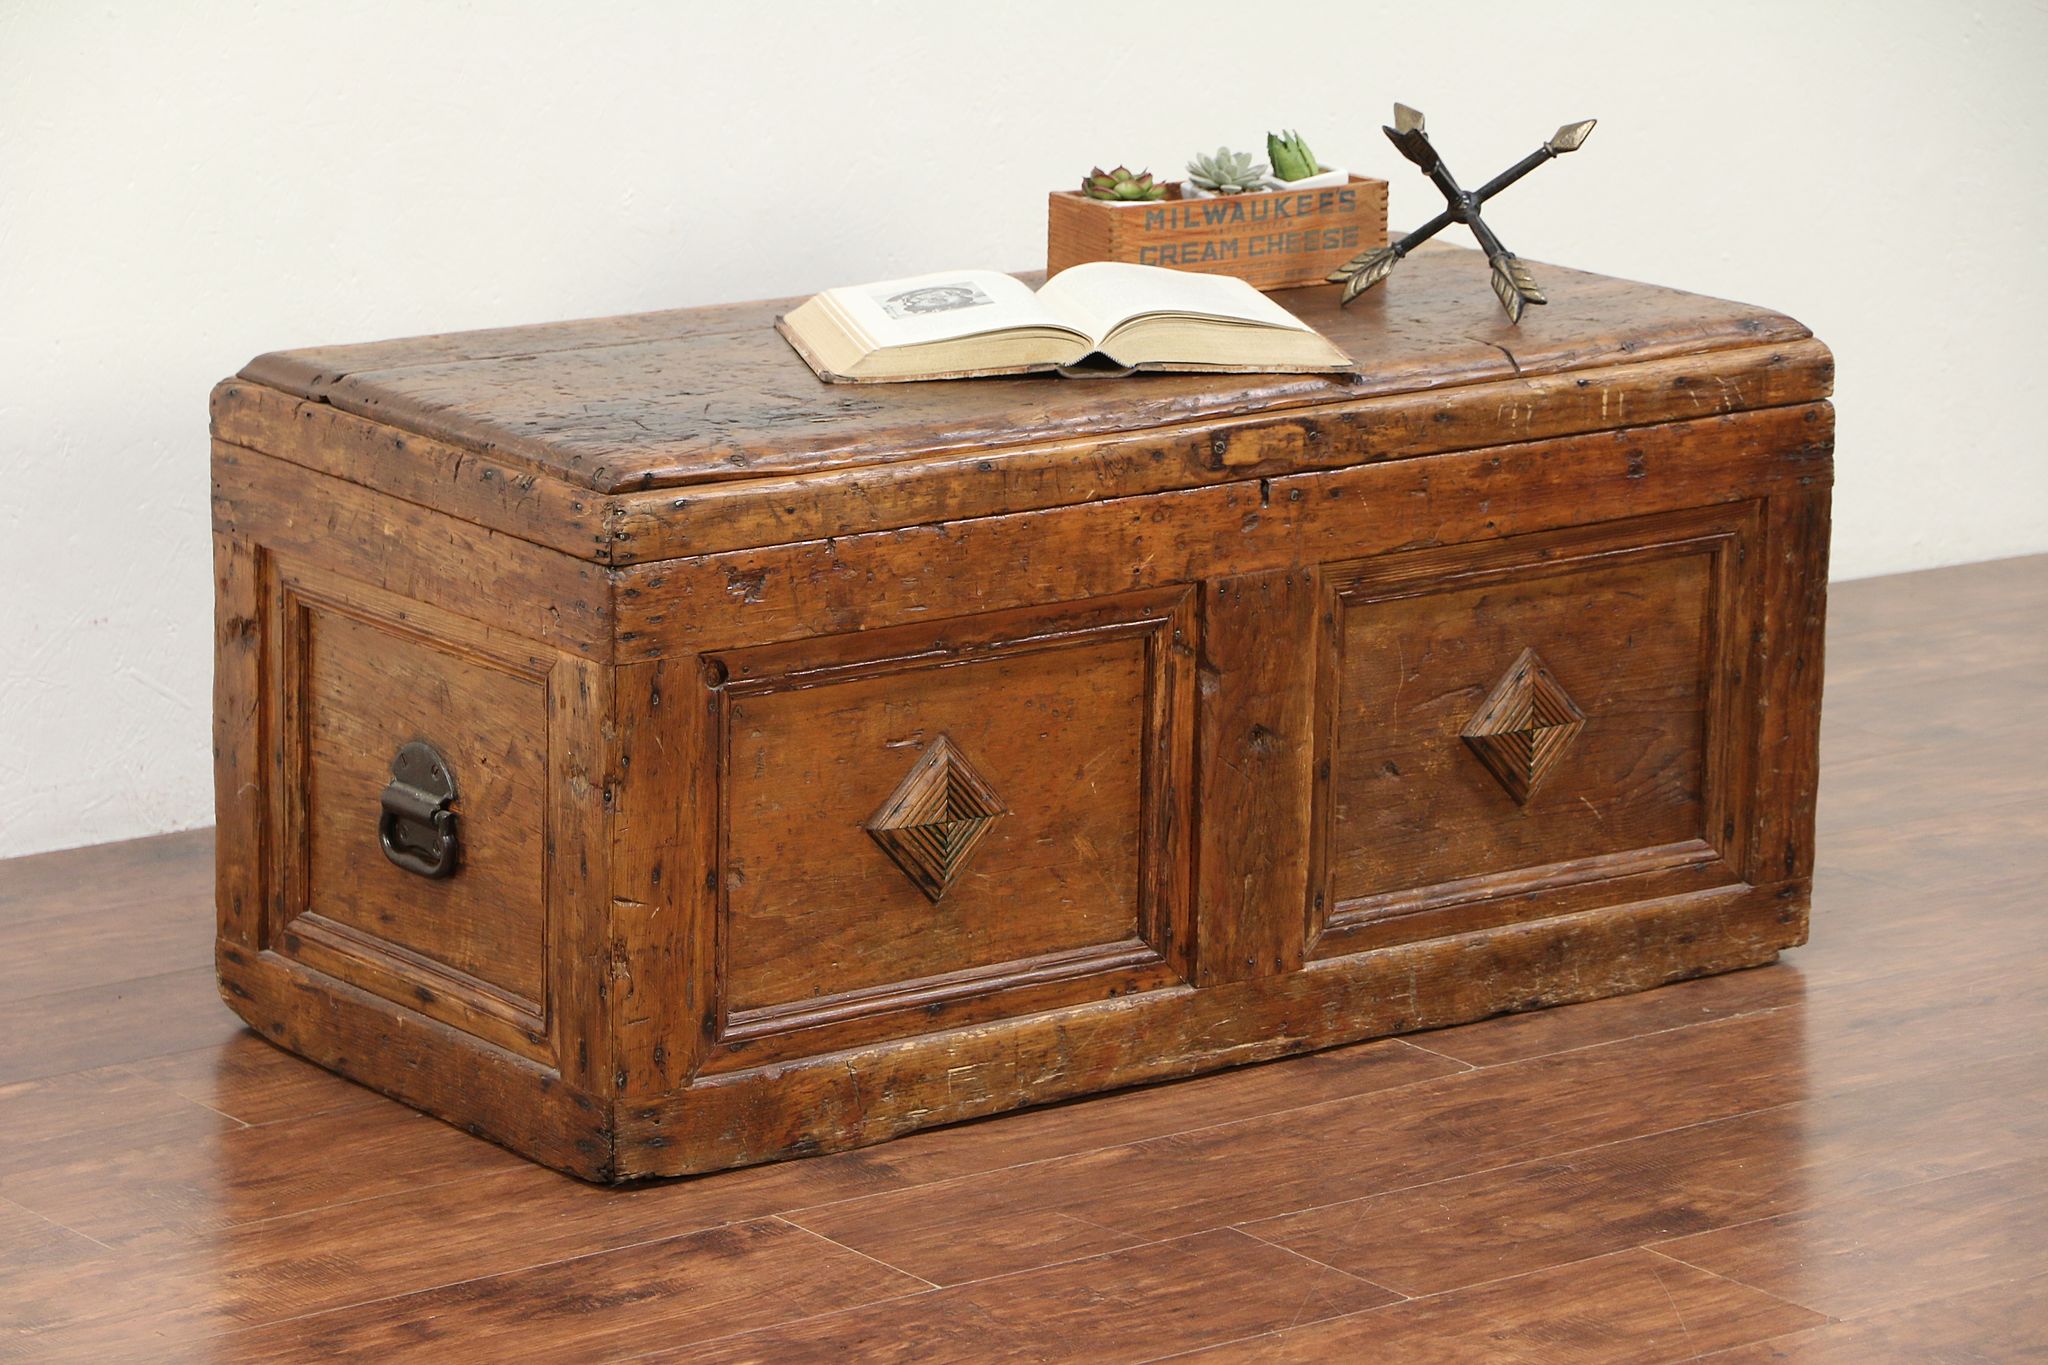 Sold Country Pine Antique Primitive Carpenter Tool Chest Trunk Coffee Table 29529 Harp Gallery Antiques Furniture